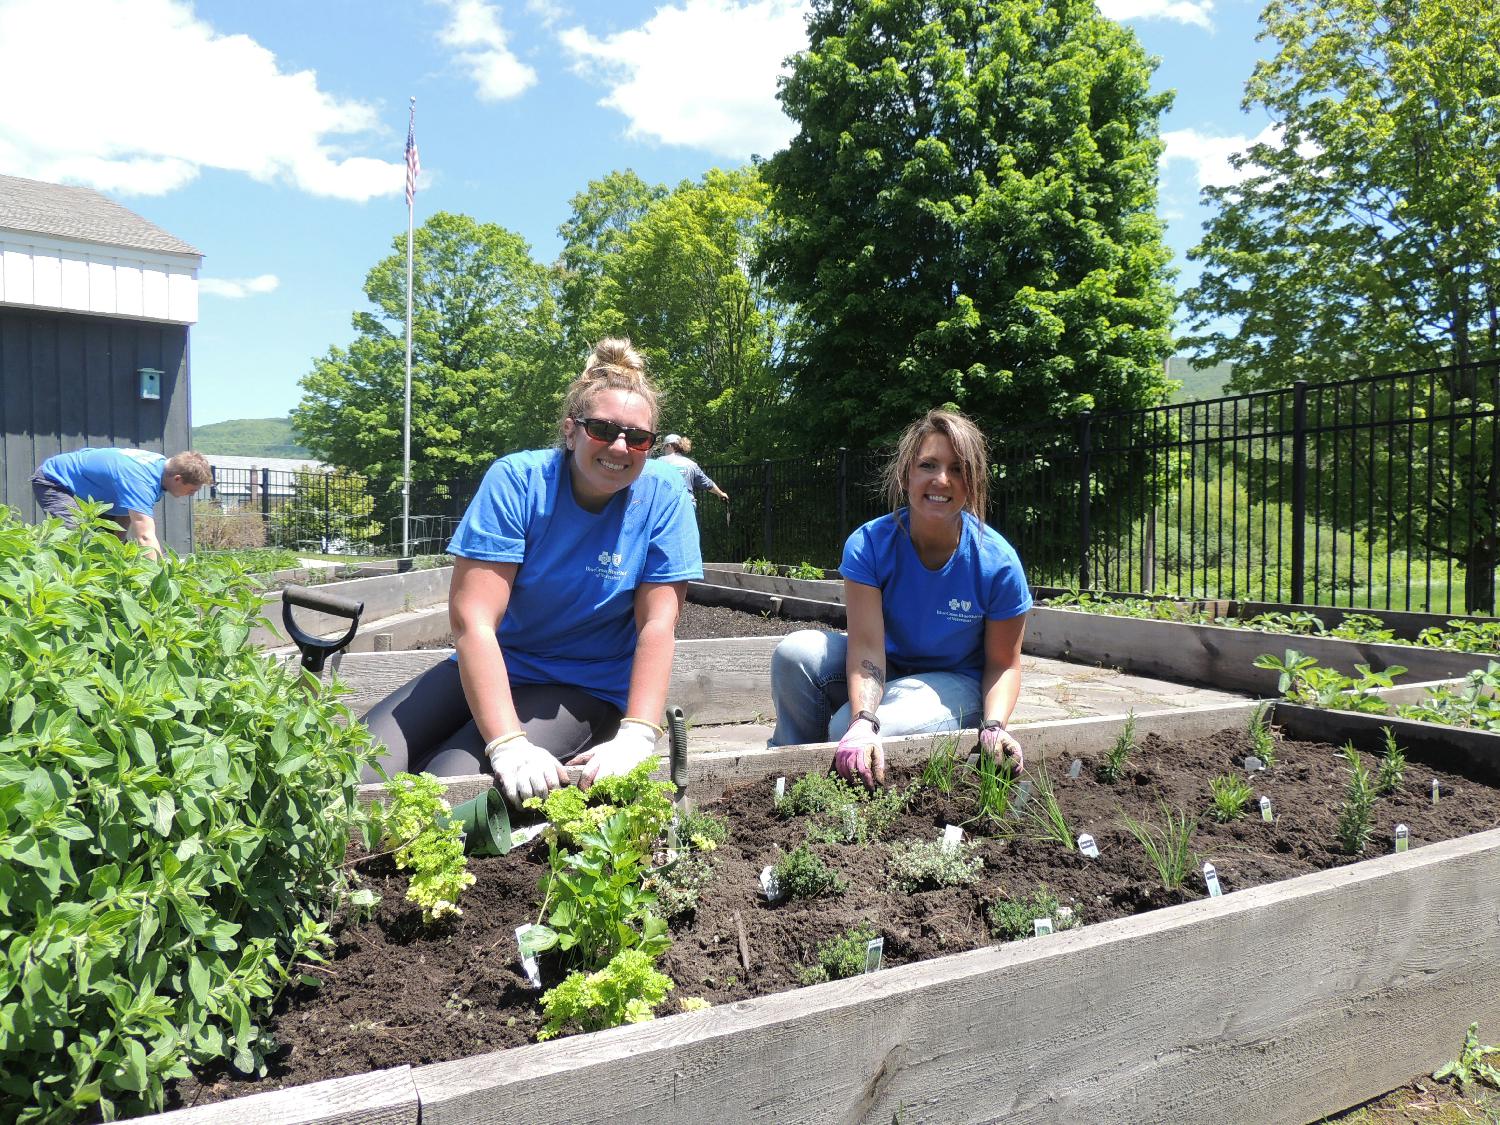 Our Blue Crew Days program encourages volunteering. This team chose to plant a garden for an area nursing home.